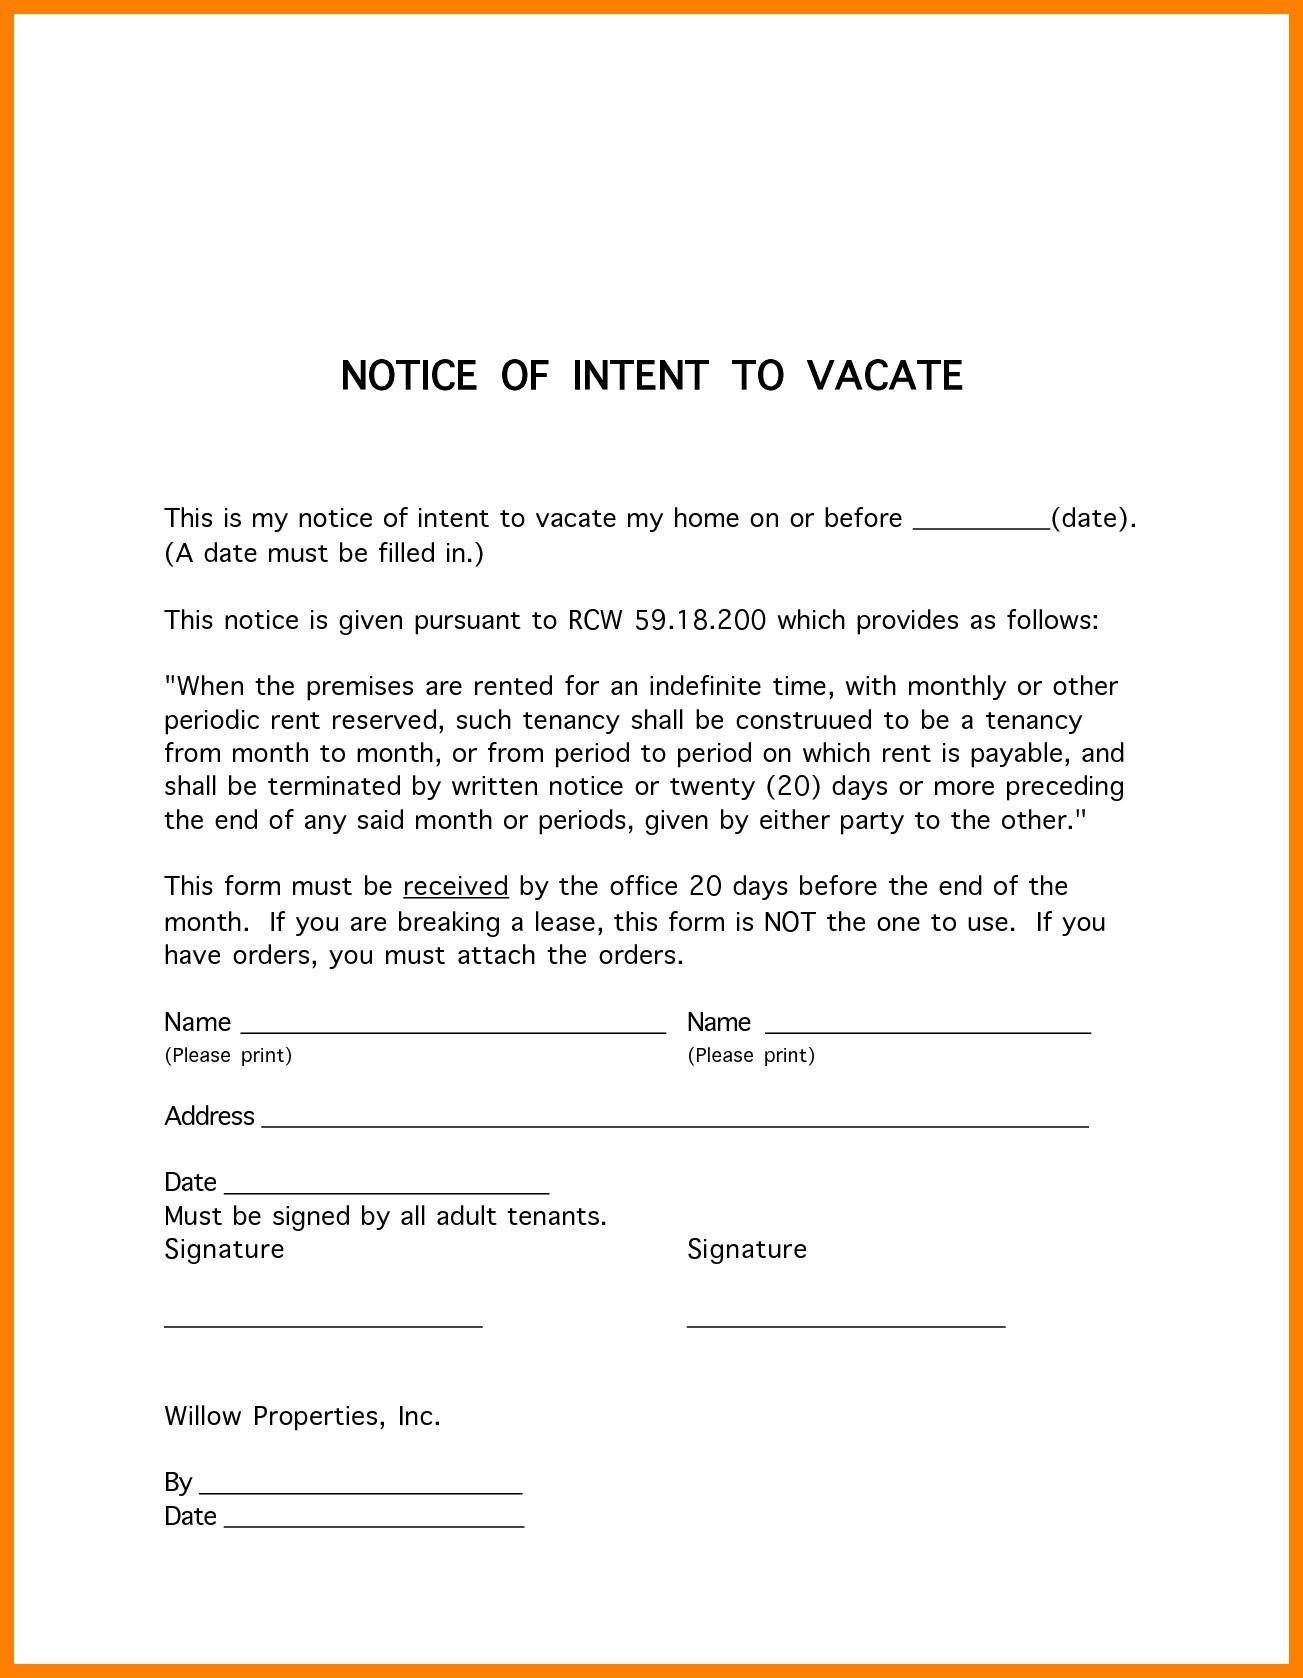 example-of-30-day-notice-letter-to-landlord-sample-templates-images